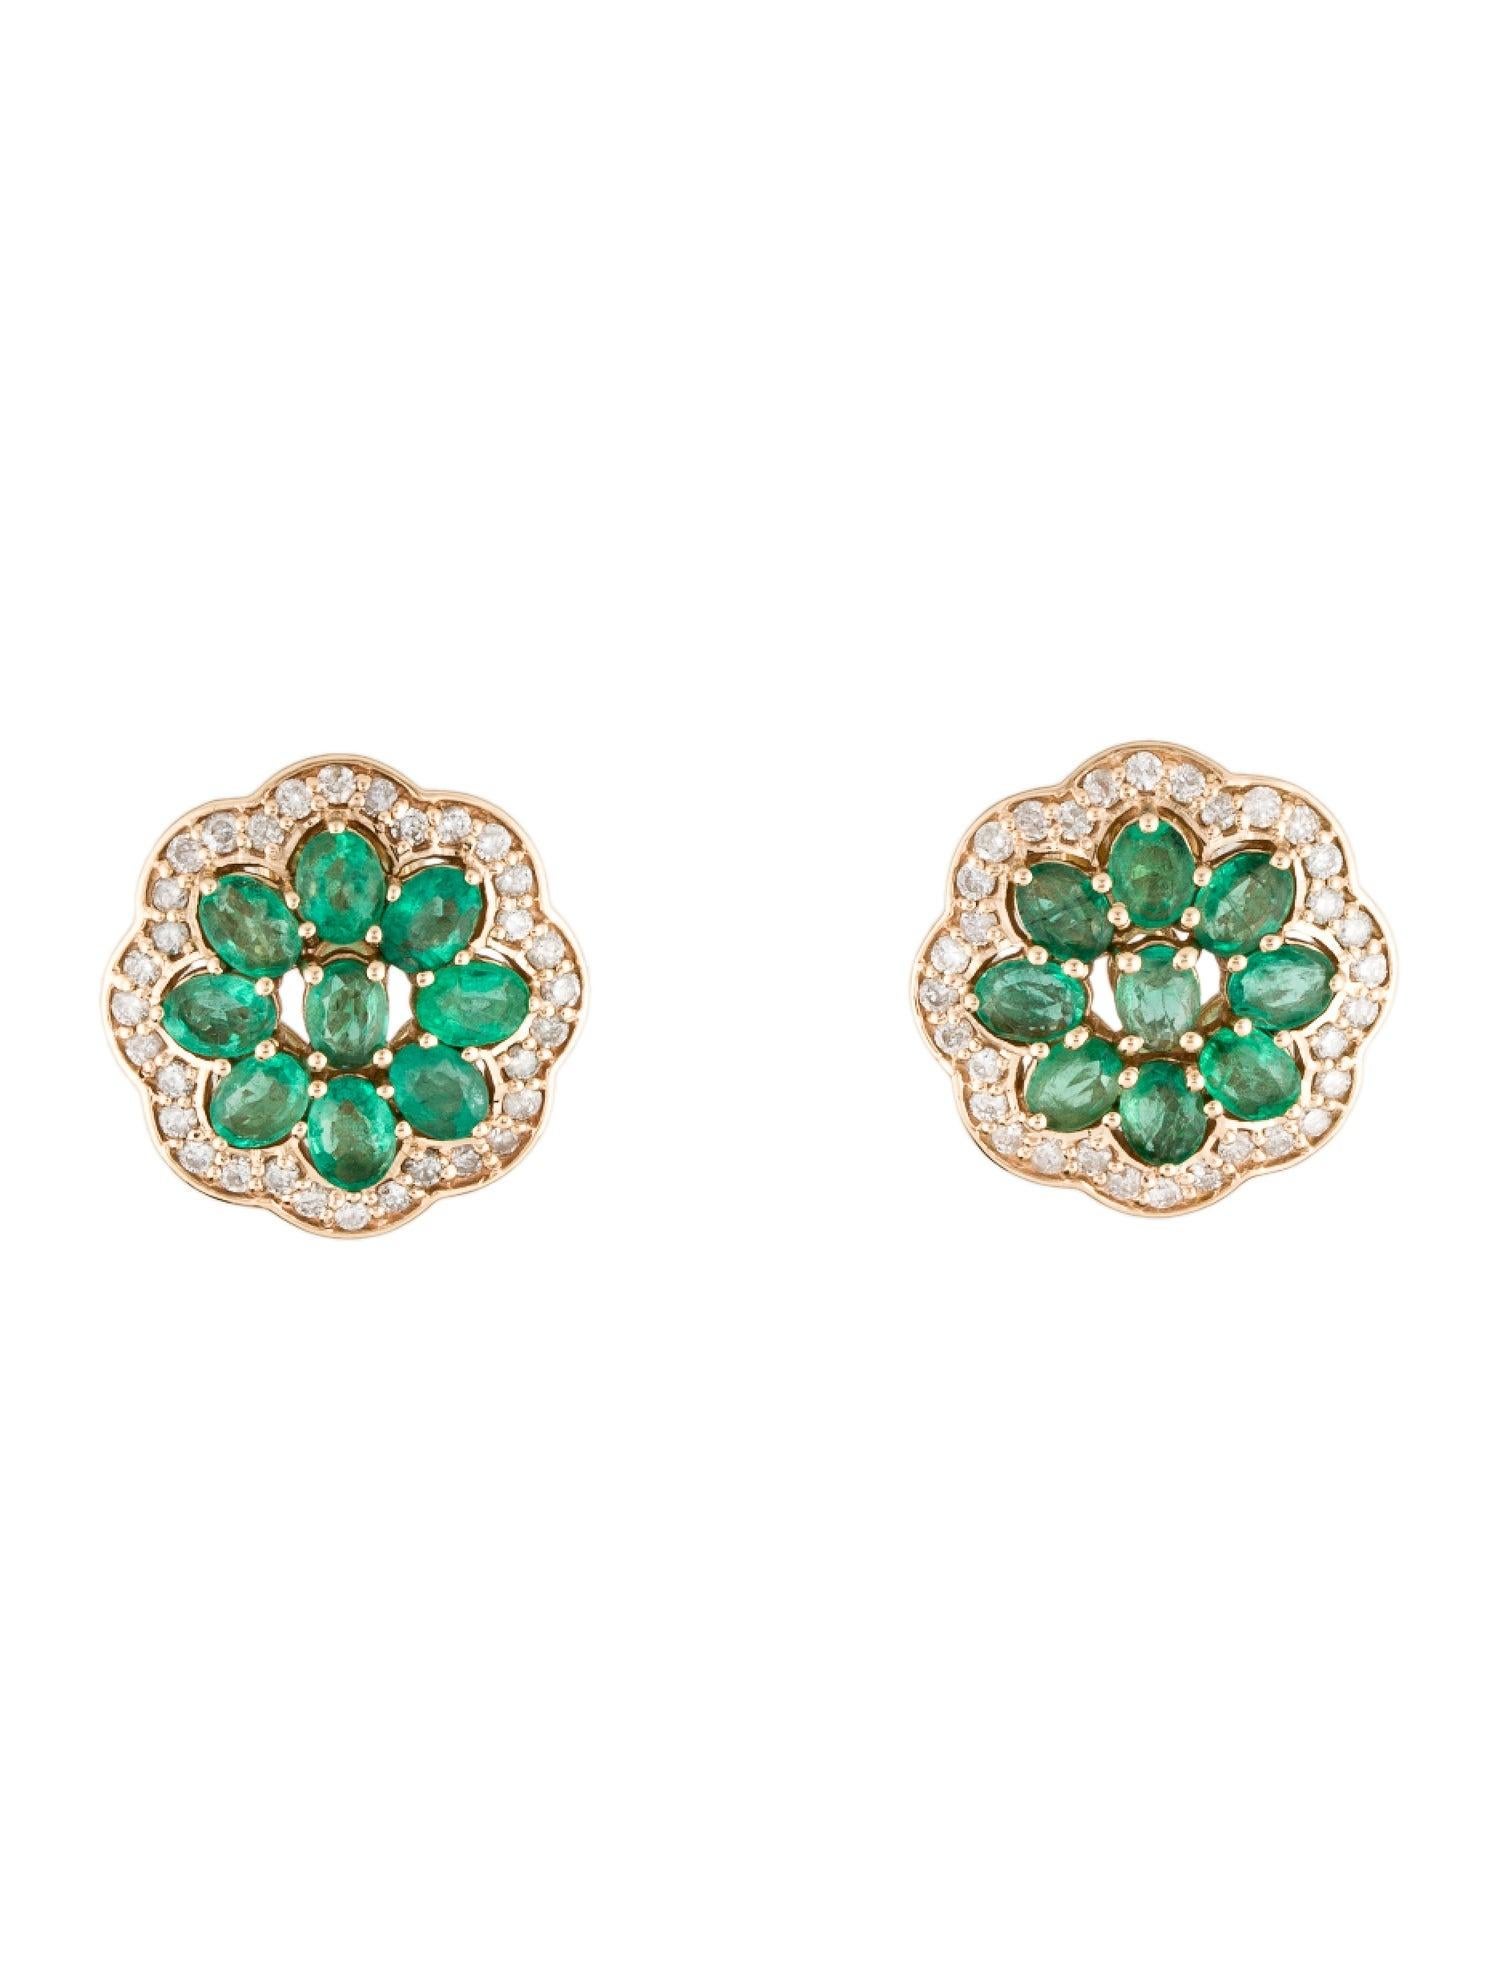 14K Emerald & Diamond Stud Earrings- Exquisite Gemstone Jewelry Timeless Glamour In New Condition For Sale In Holtsville, NY